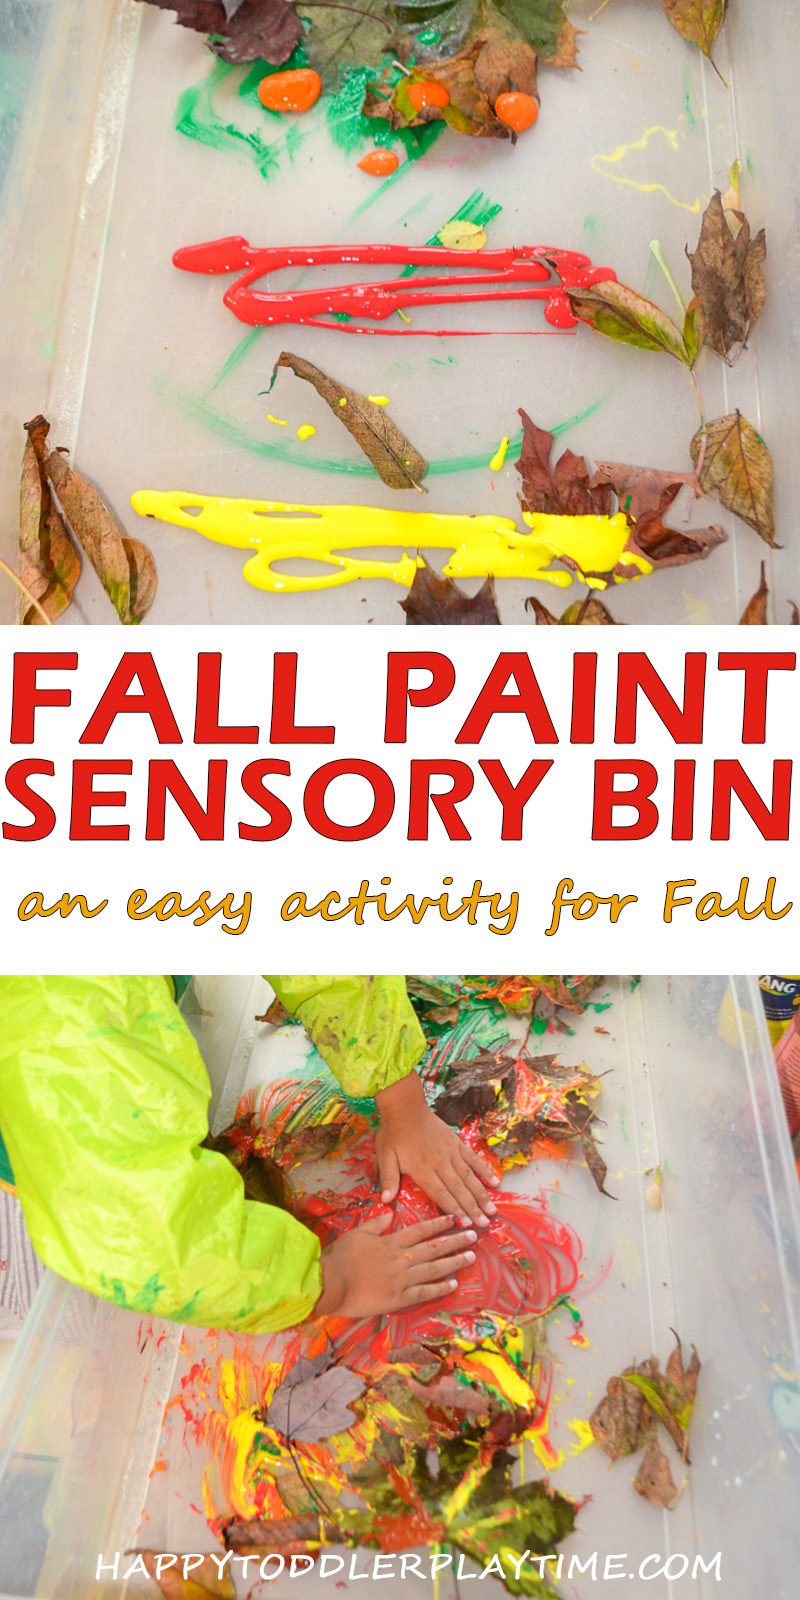 fall paint sensory bin for toddlers and preschoolers